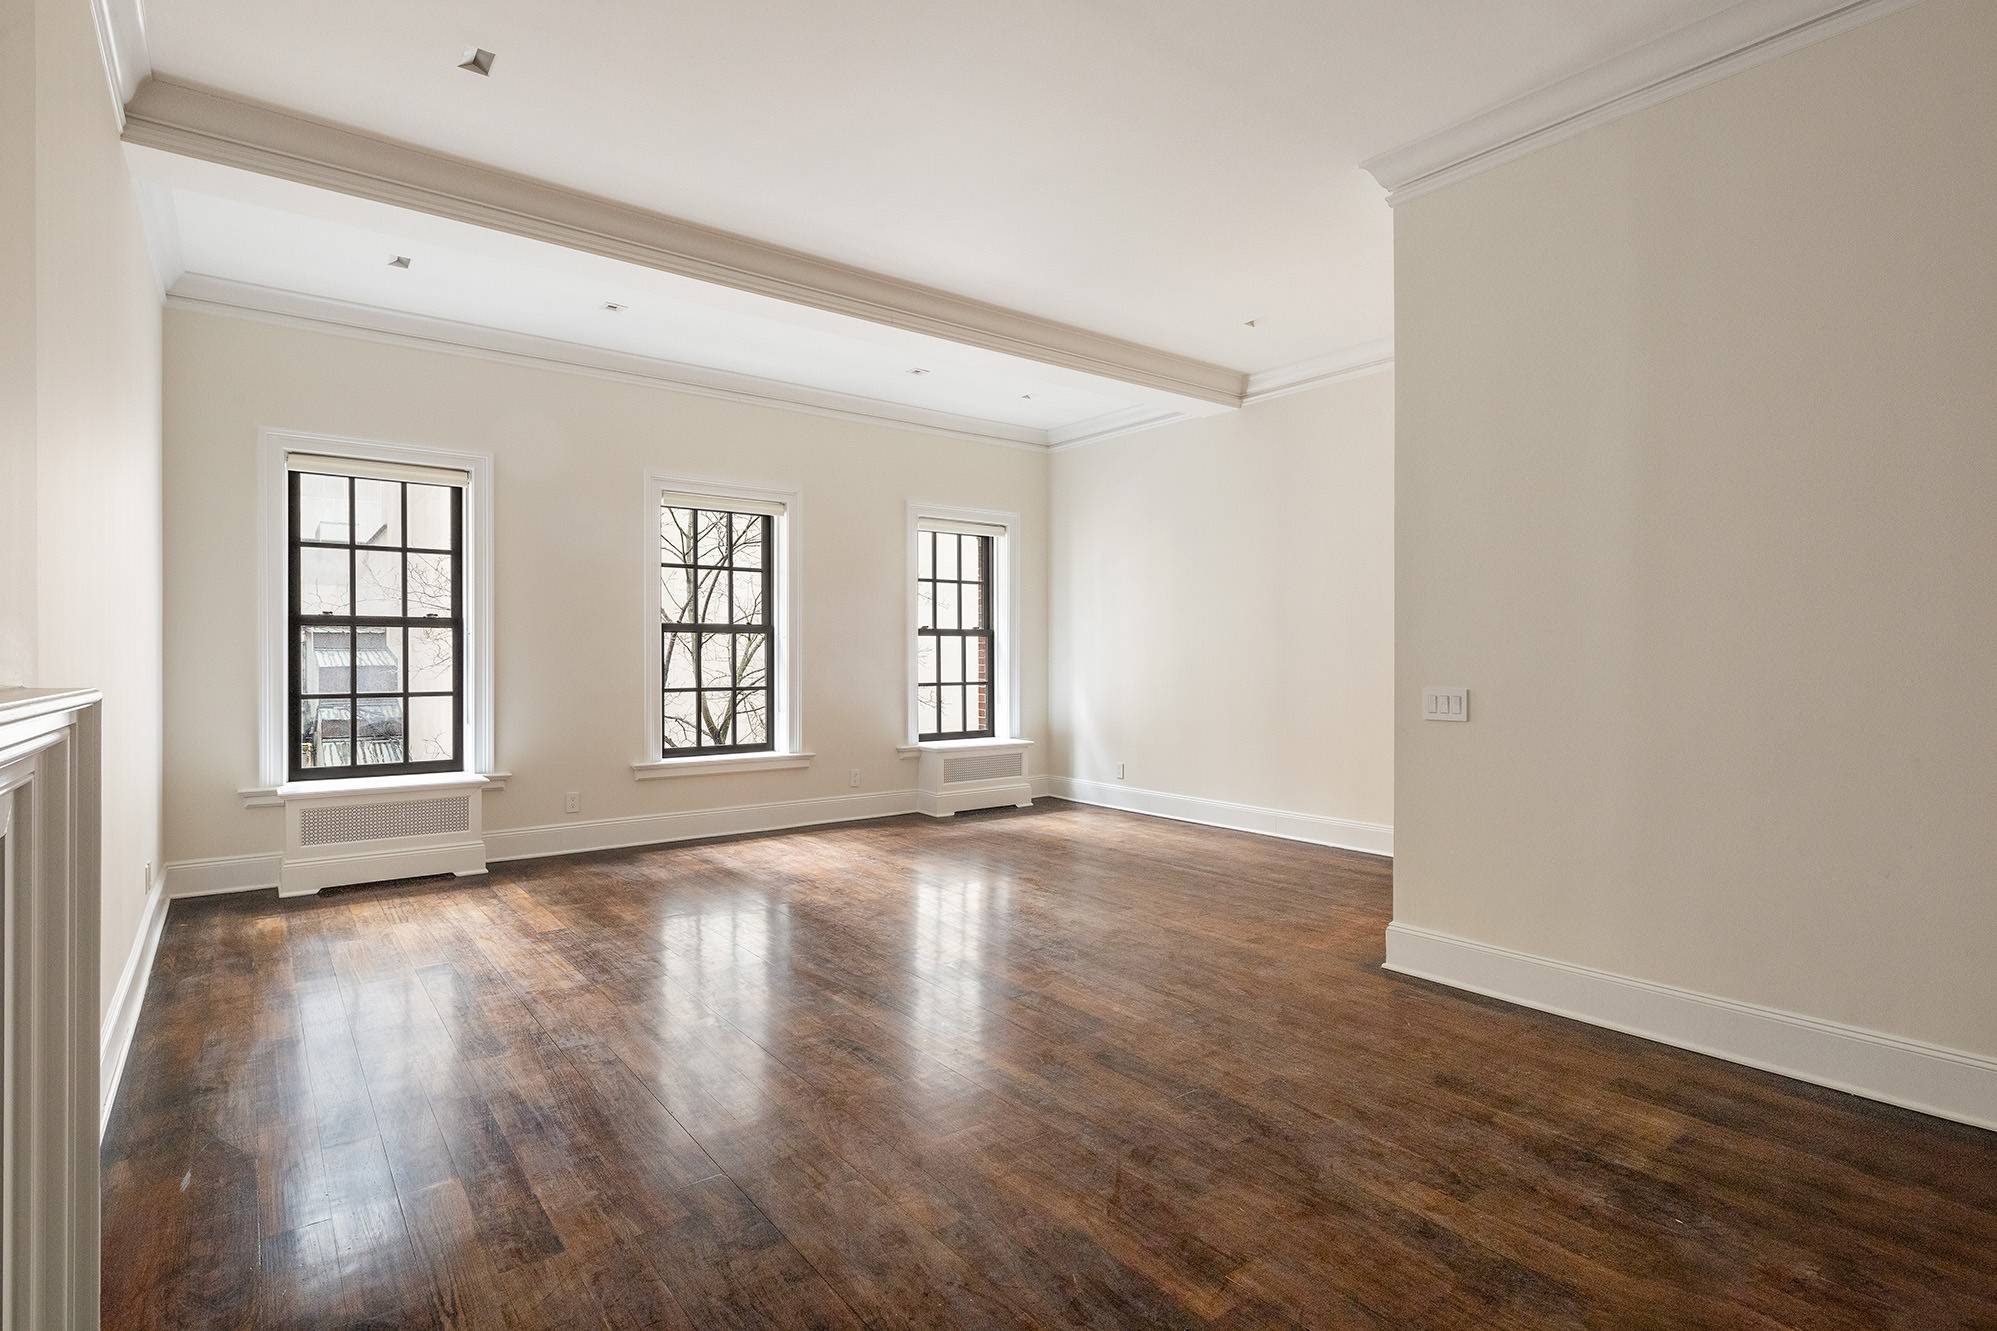 Welcome to your new home in this exquisite massive 2 bedroom 2 bath apartment situated in the heart of the UES.